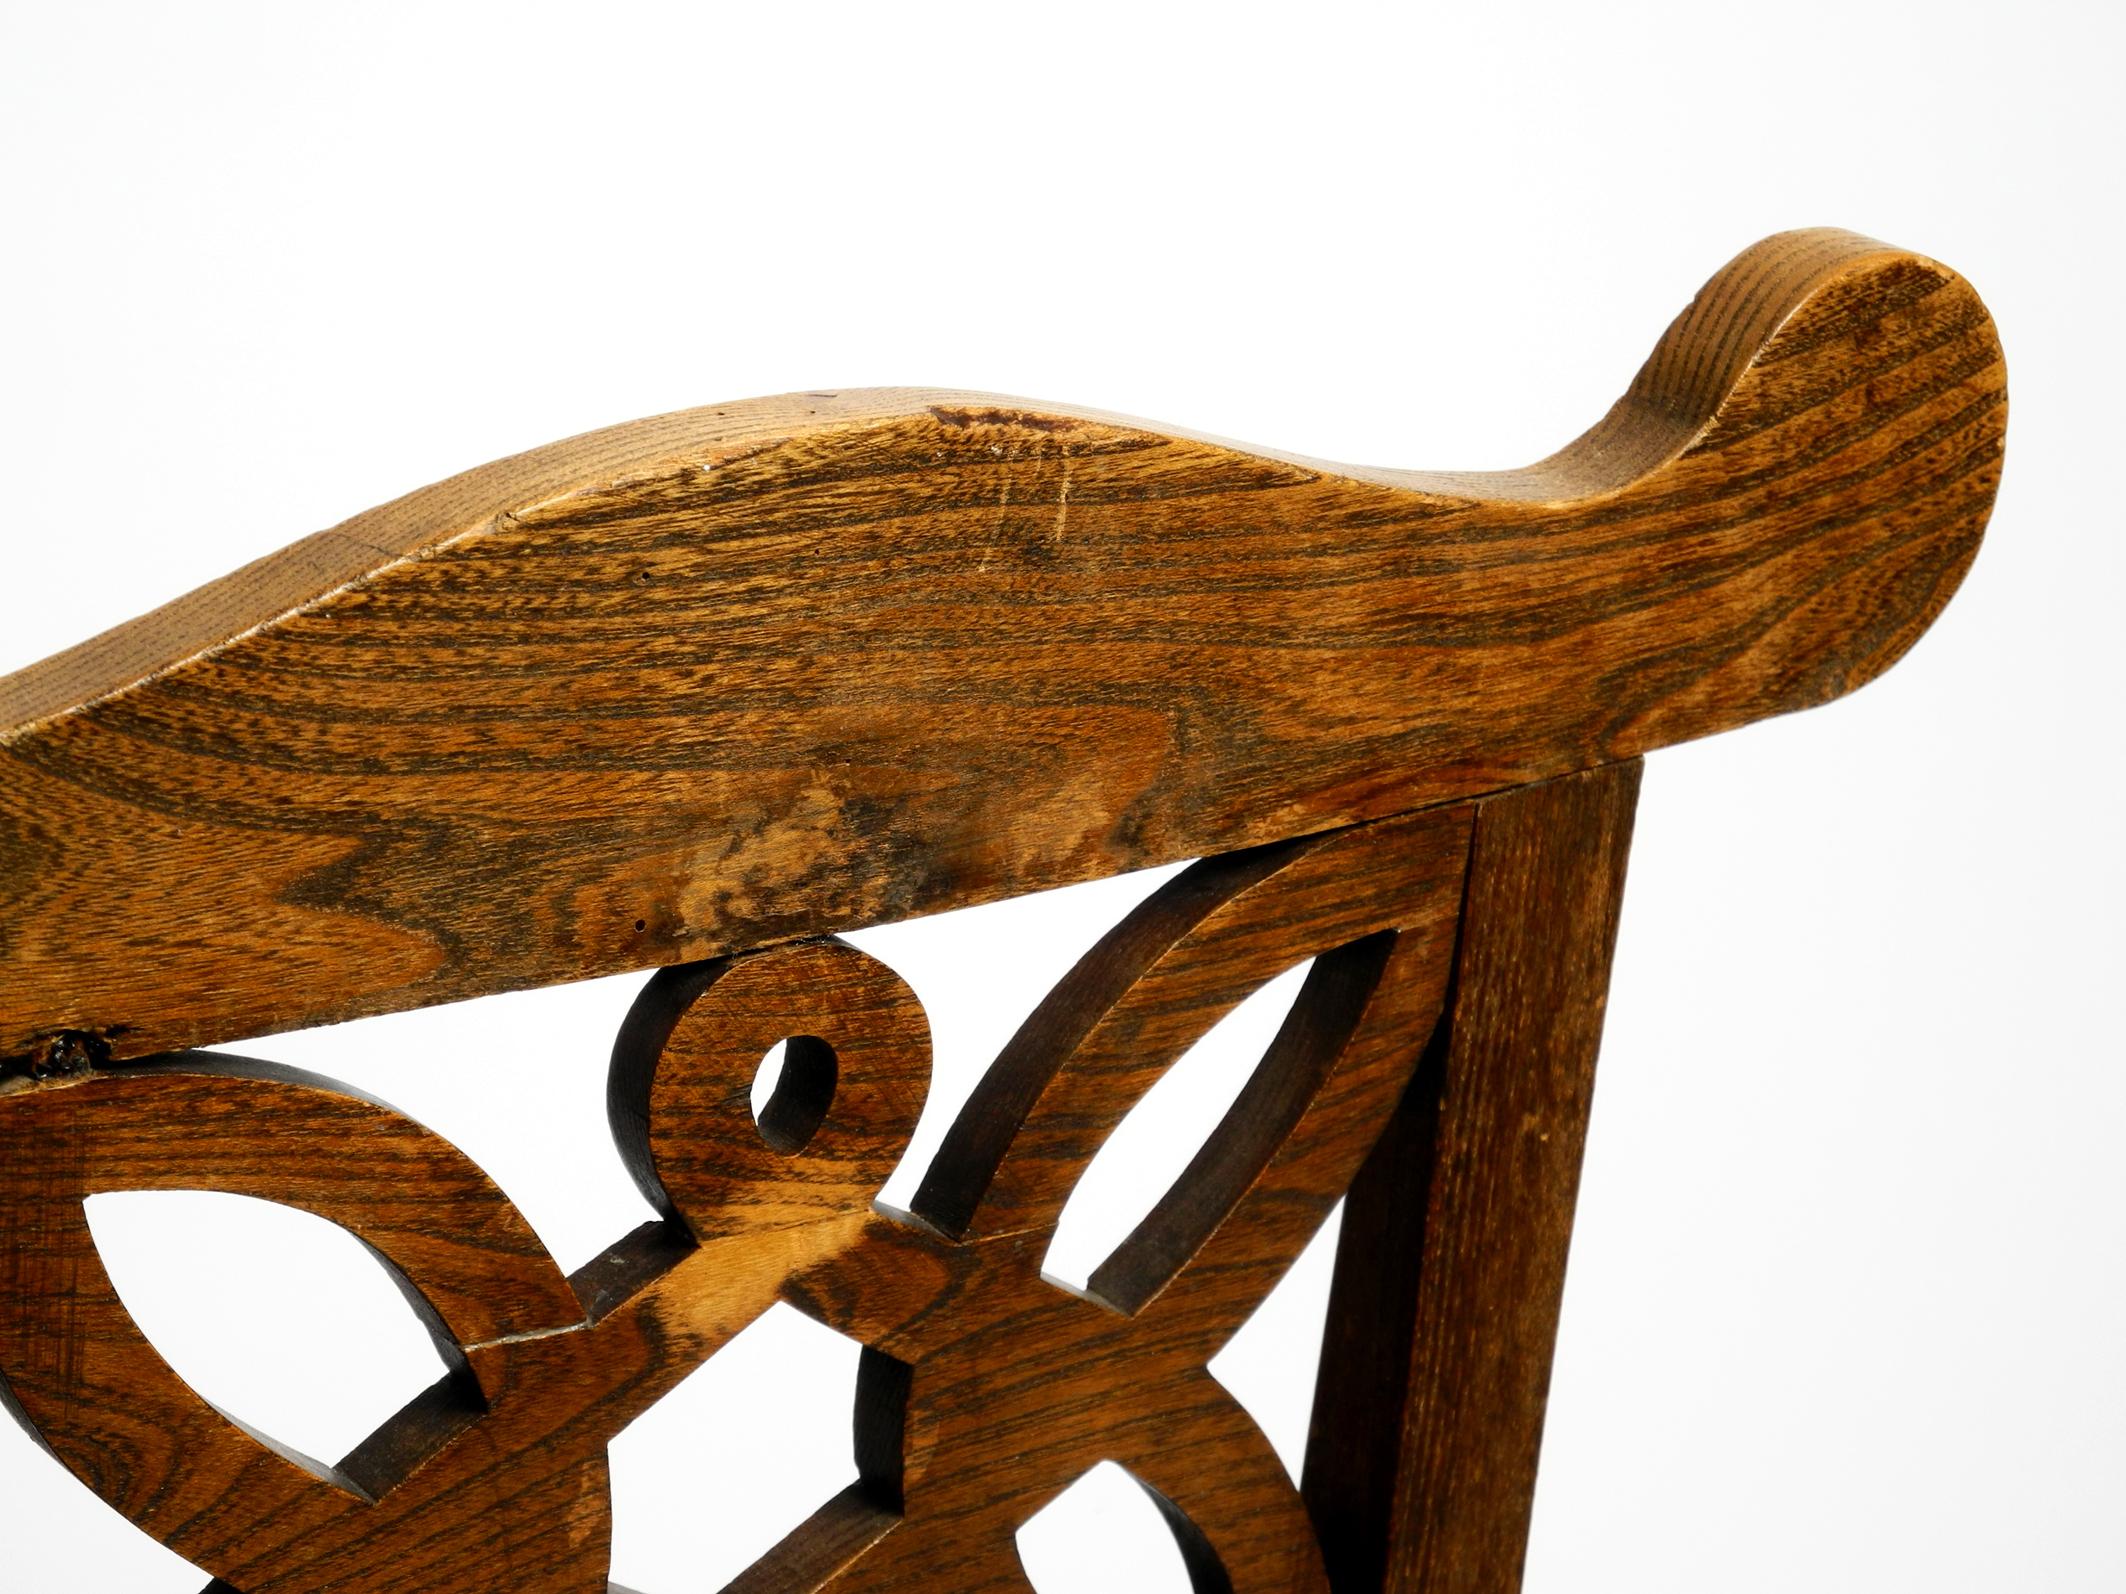 2 Art Nouveau Oak Chairs Still with the Original Leather Seats from Around 1900 For Sale 8